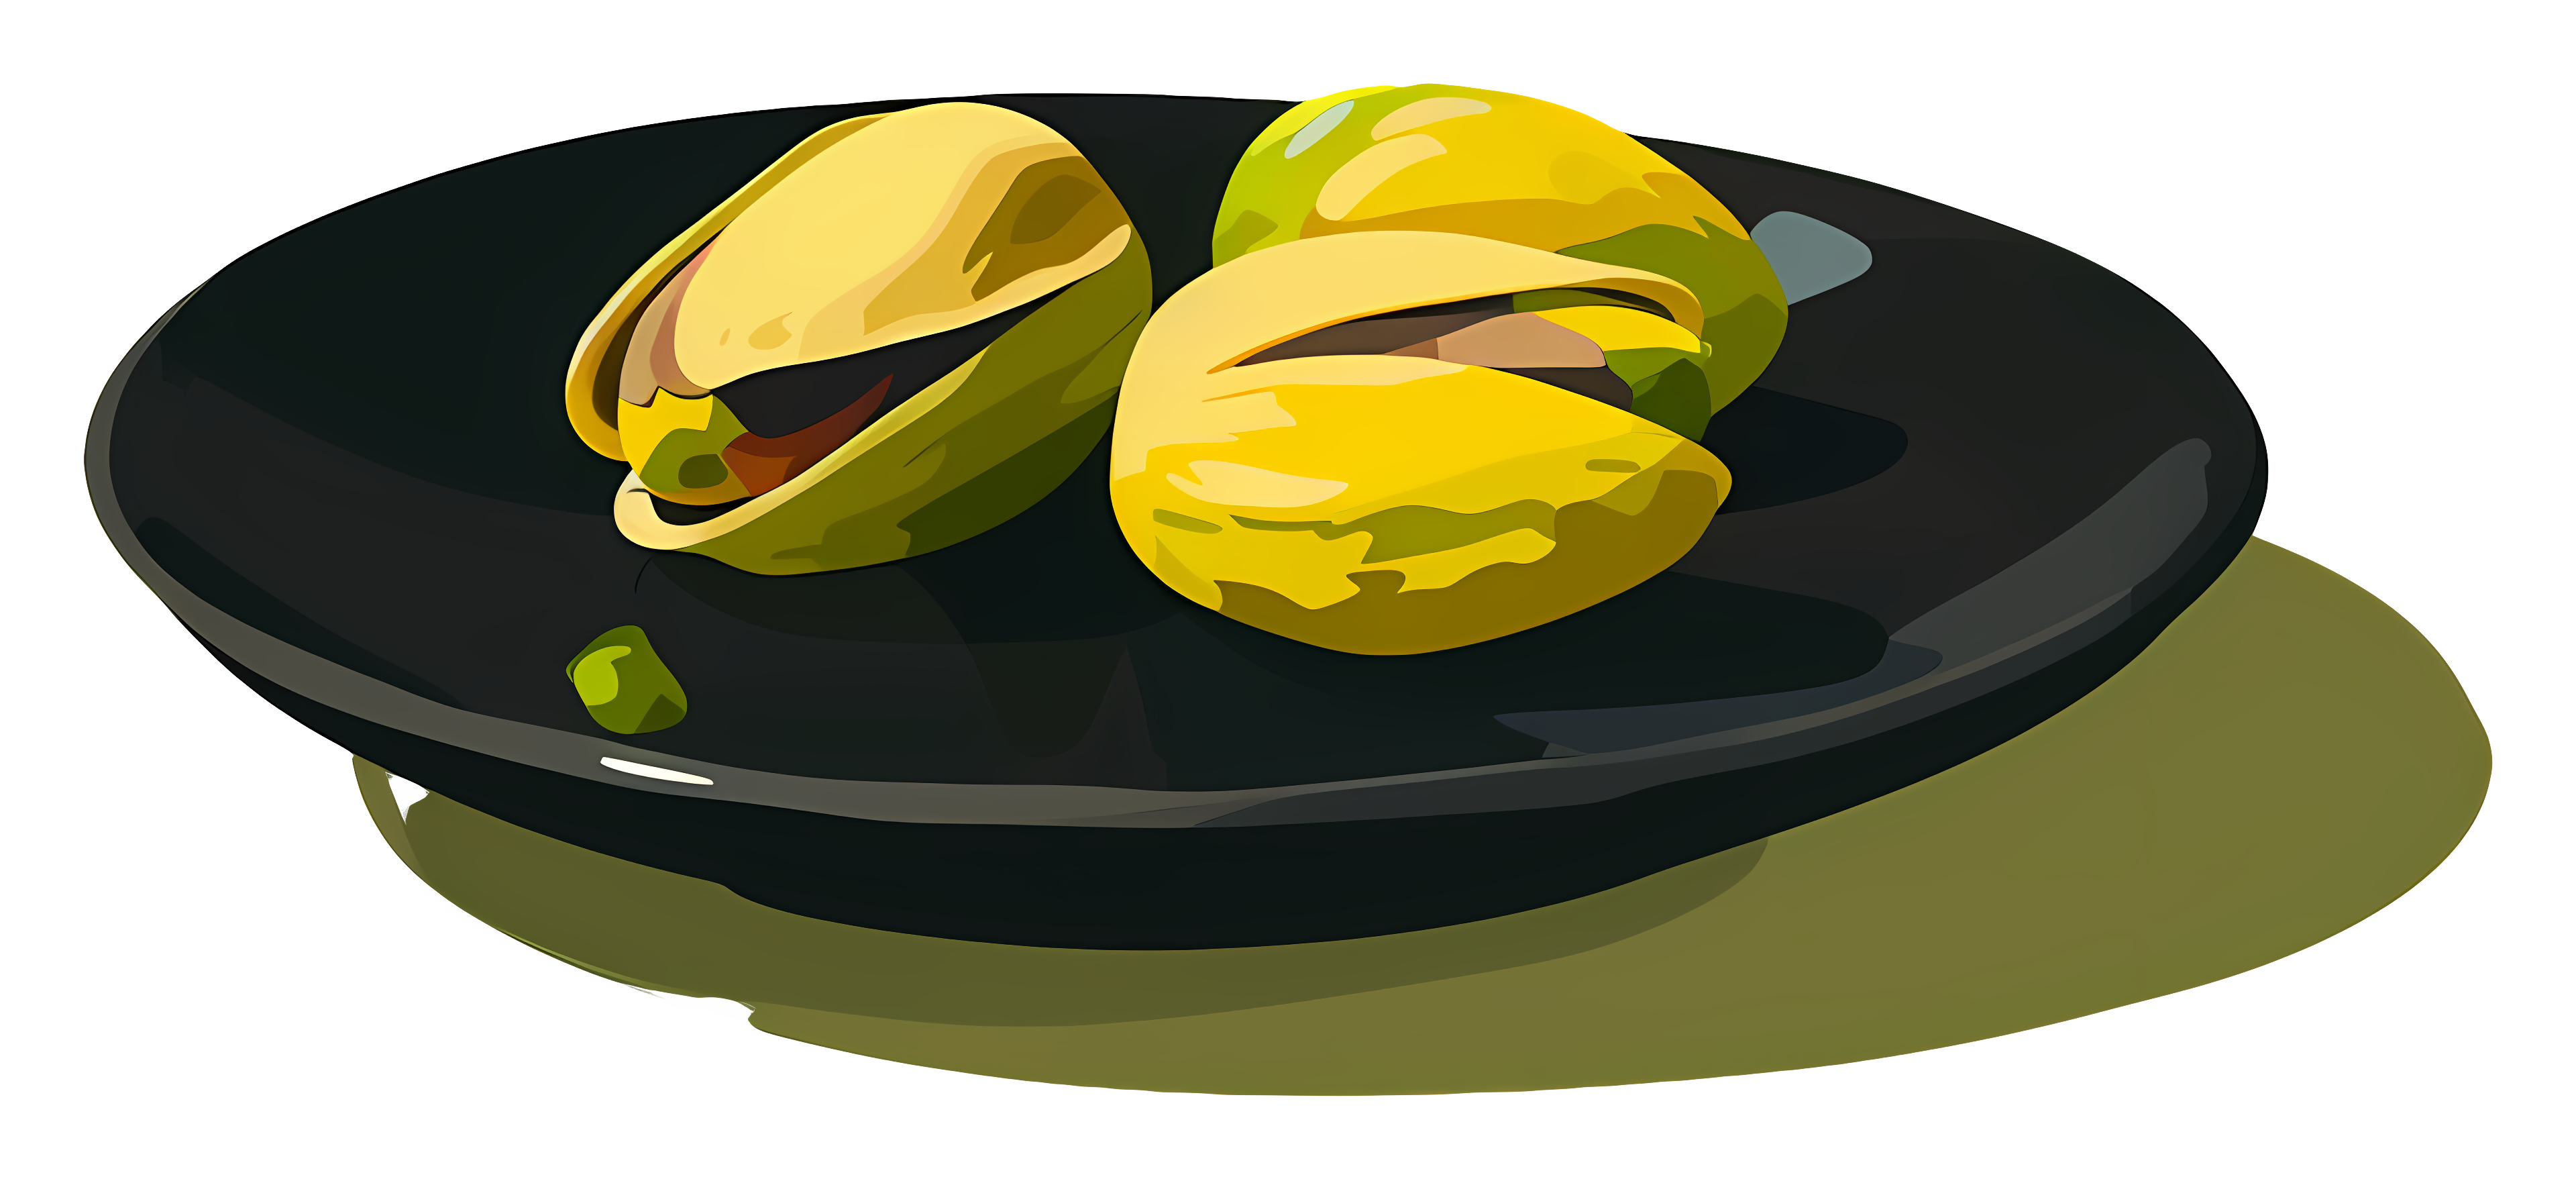 Three shelled almonds on black plate Clipart